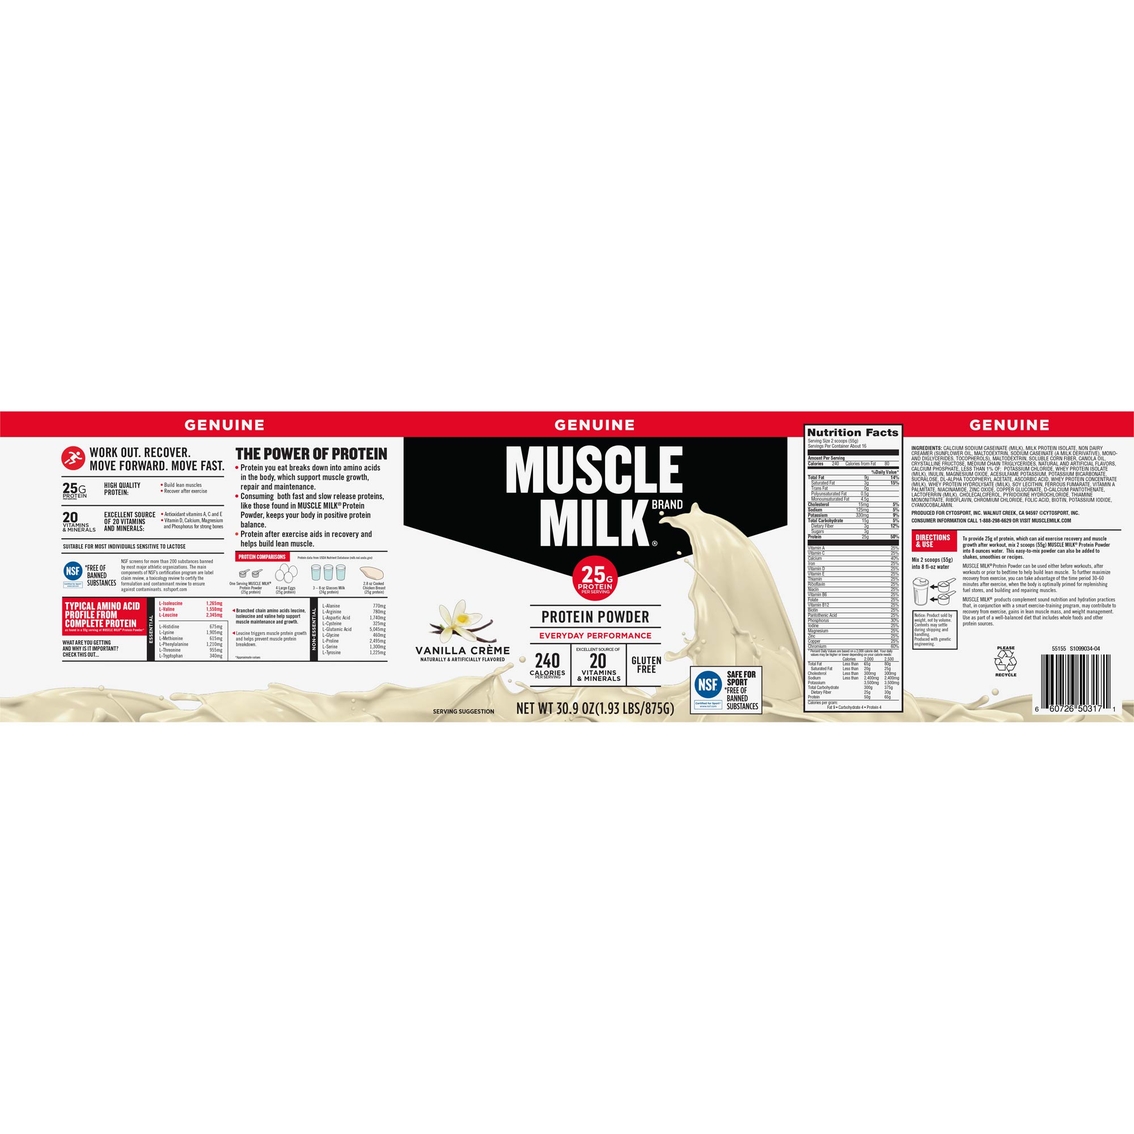 Muscle Milk Protein Powder - Image 2 of 2